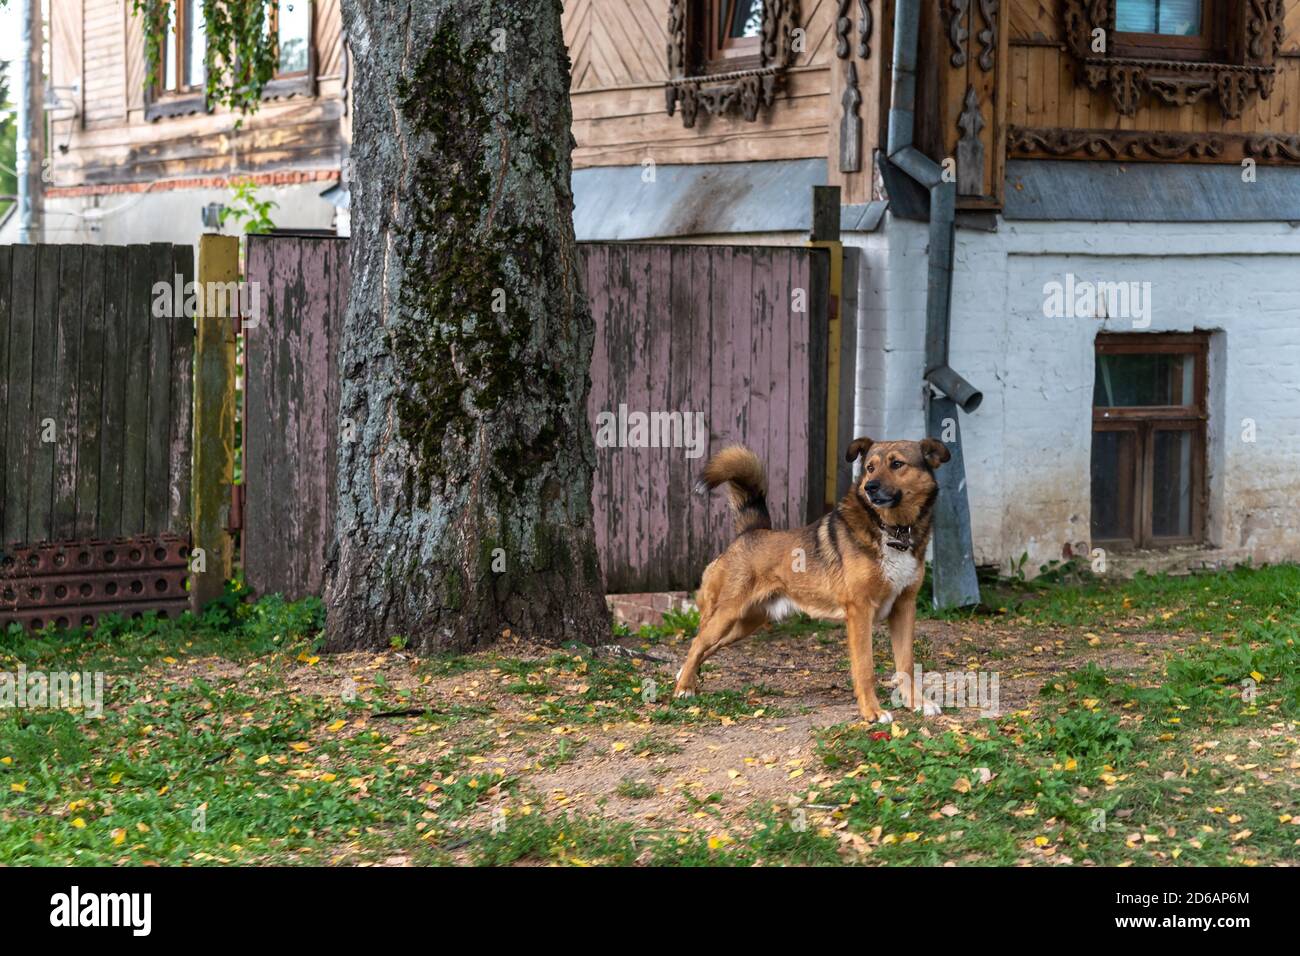 Dog in yard of rustic wooden house summer cottage Stock Photo